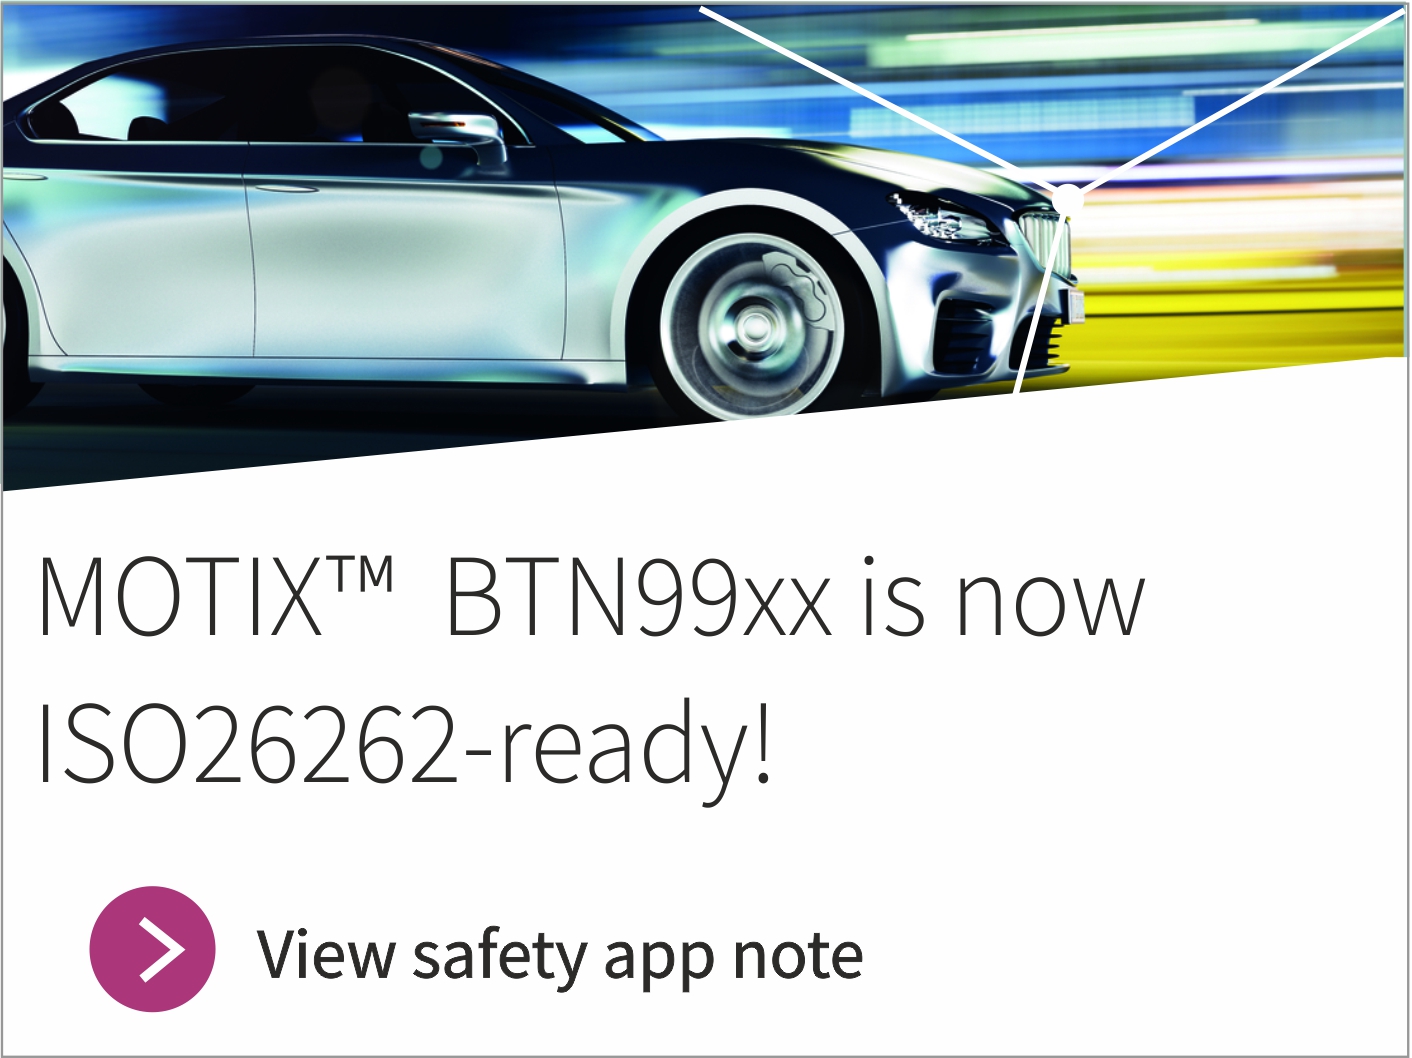 iso26262-ready for BTN99XX